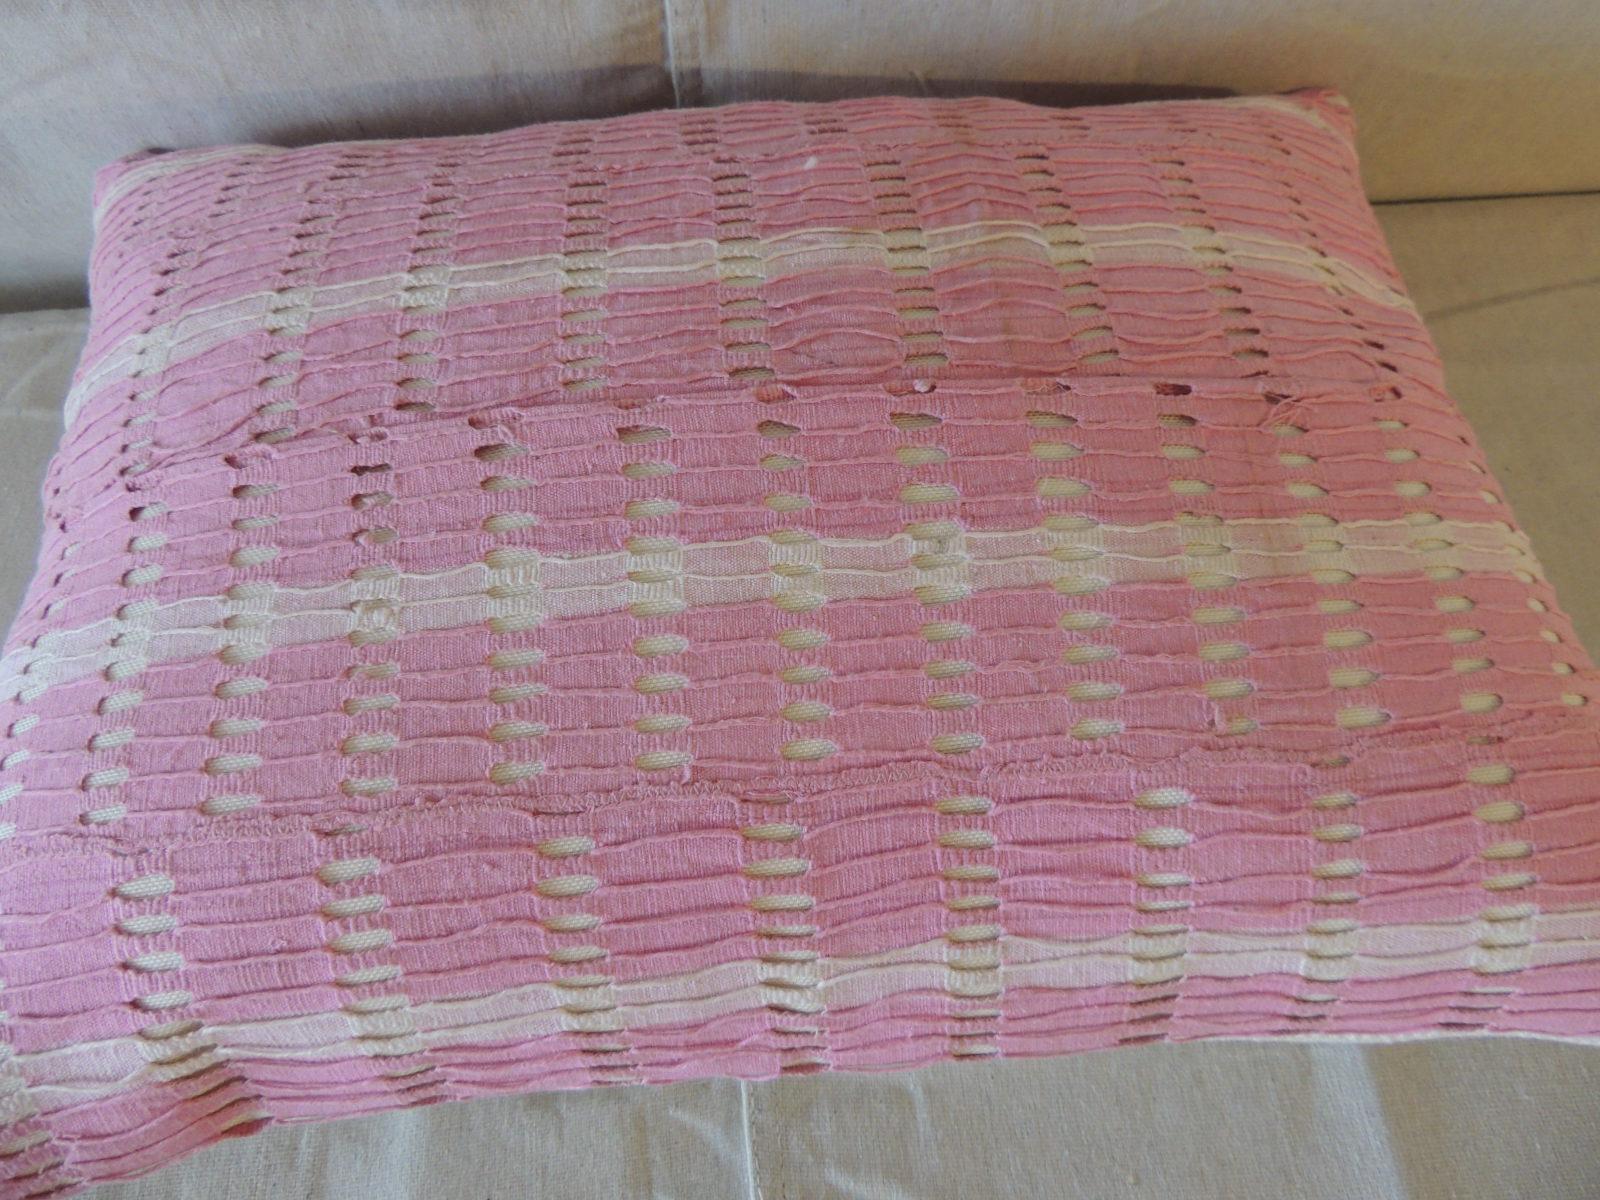 Hand-Crafted Vintage Yoruba Lace Weave Hot Pink African Bolster Decorative Pillow